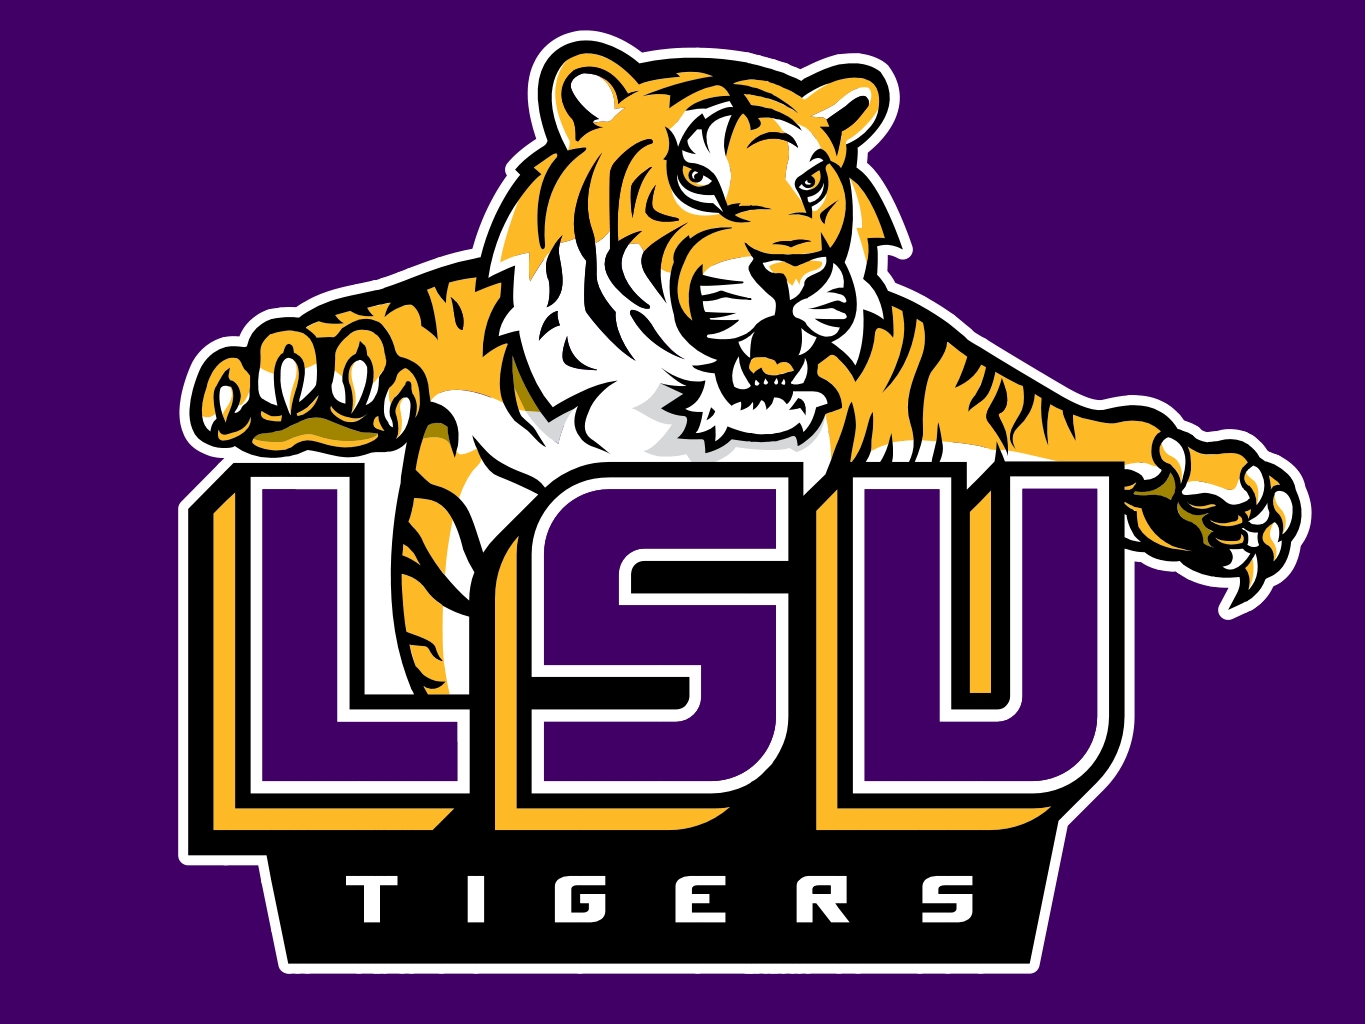 LSU Tigers Football logo on a blue background free image download